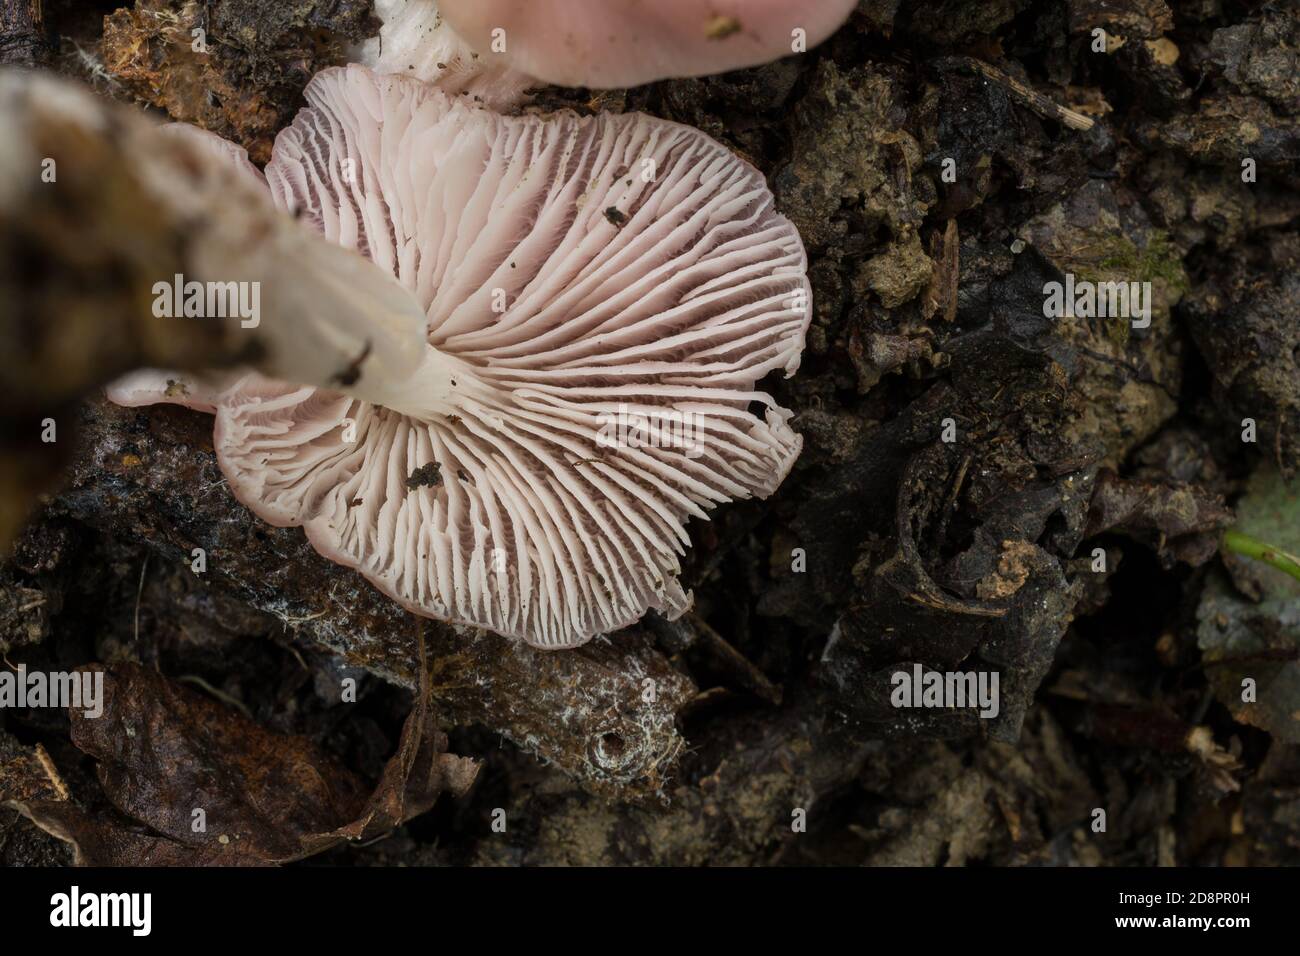 The gills of what is possibly a young 'sickner' or Russula emetica mushroom. Stock Photo